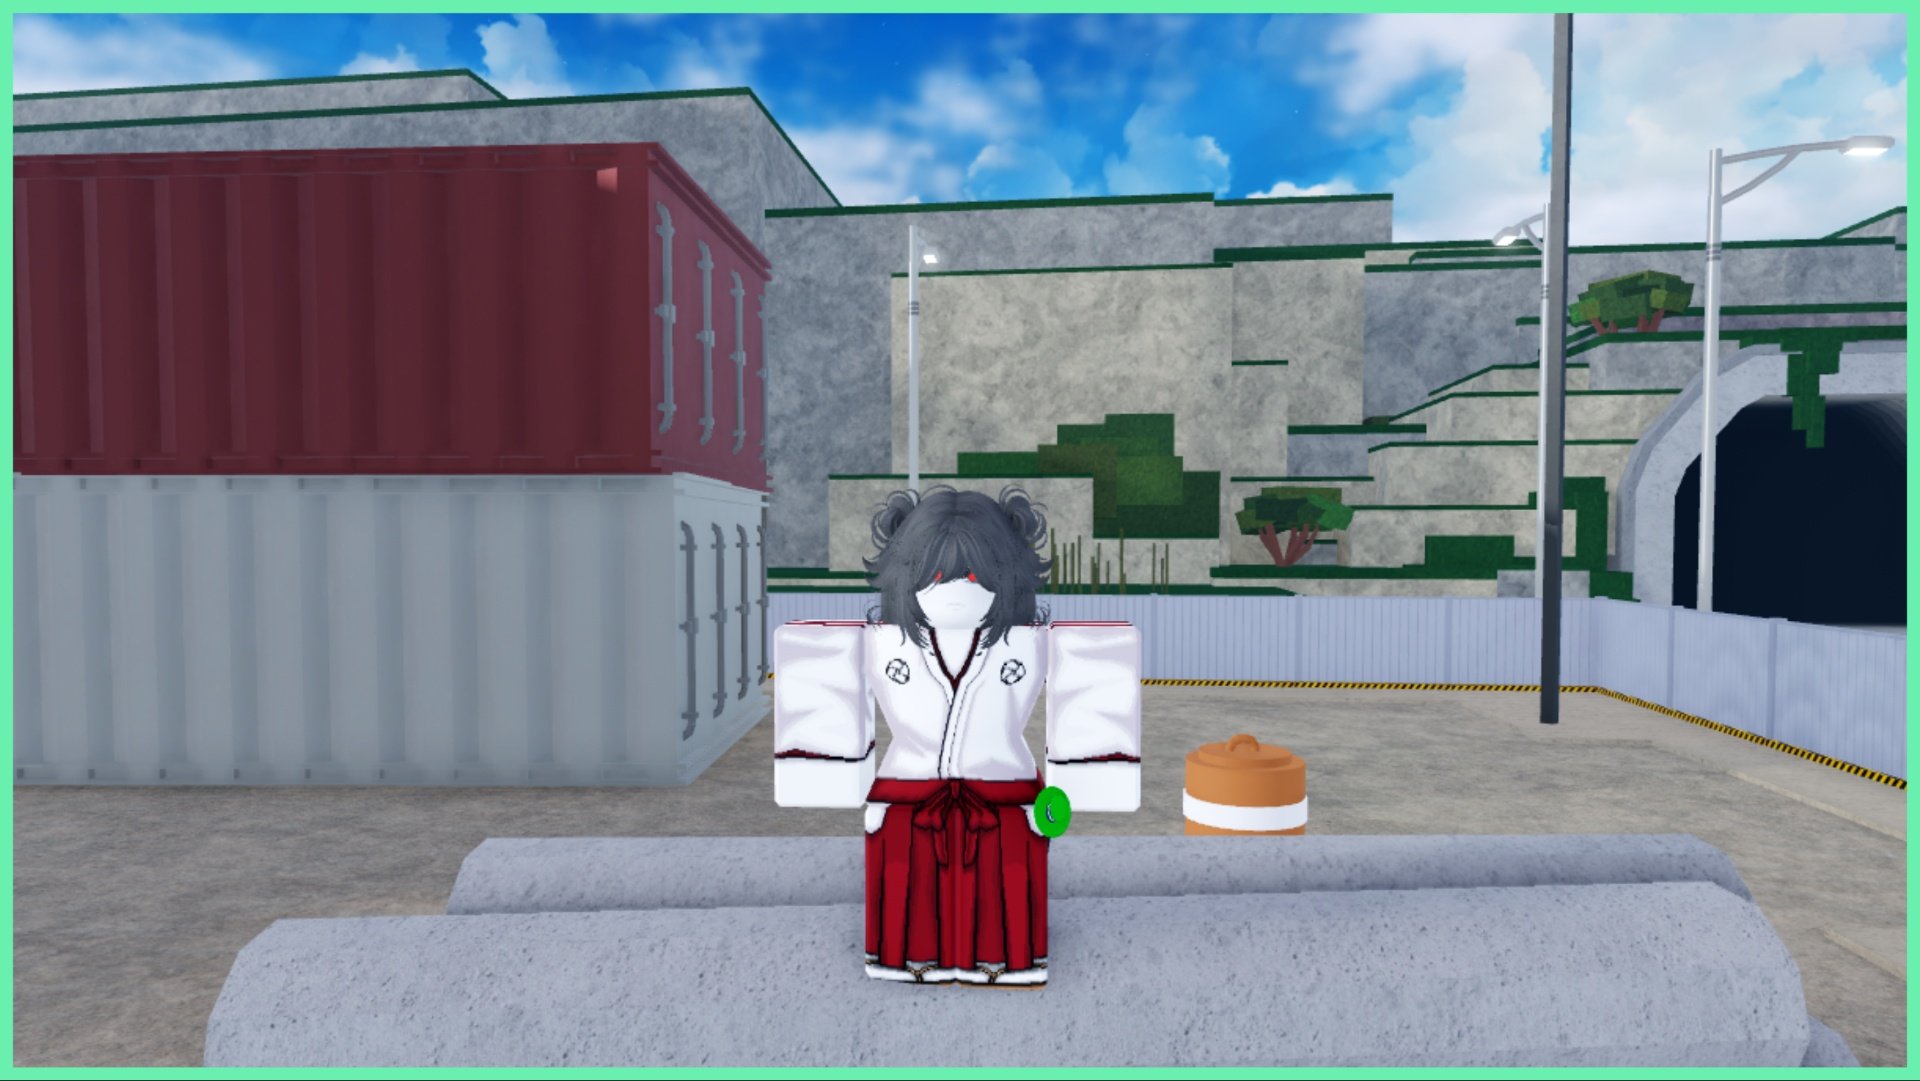 Featured image for our Type Soul Cybernetic Box guide showing a soul reaper stood in a complex grounds with large container units behind her whilst she stands on metal piping.